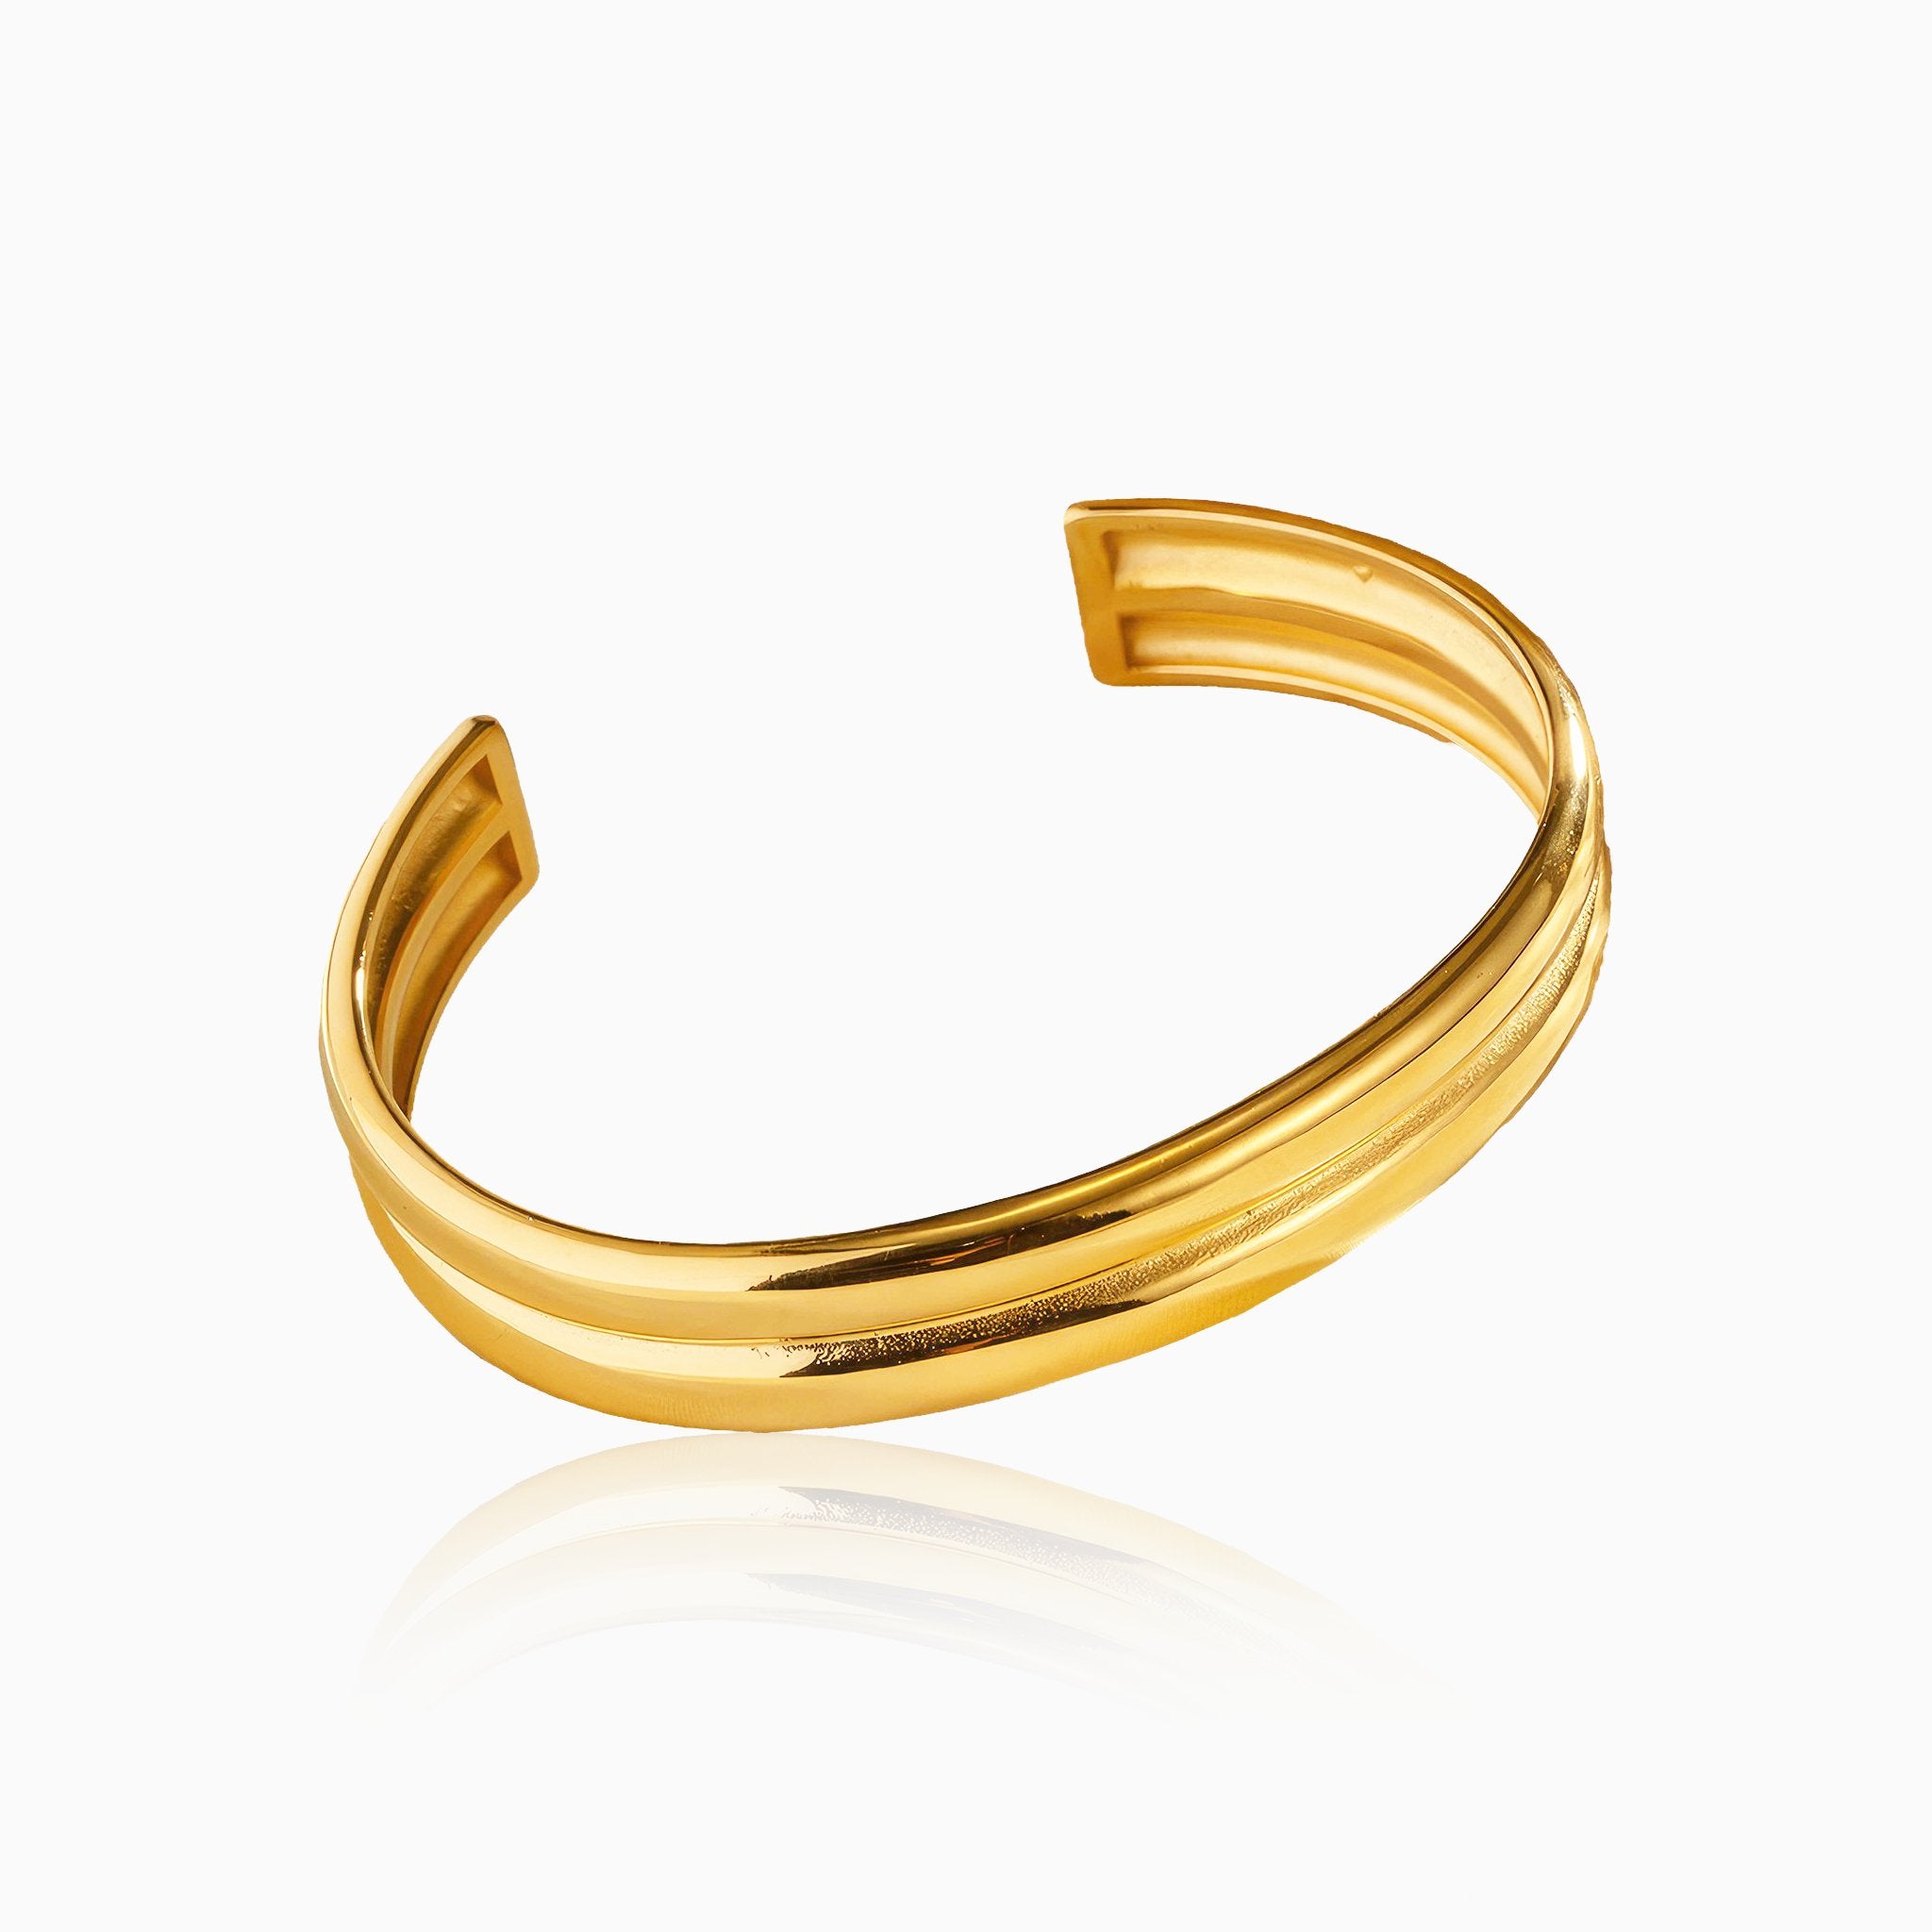 Double-Opening Versatile Bangle - Nobbier - Bangle - 18K Gold And Titanium PVD Coated Jewelry